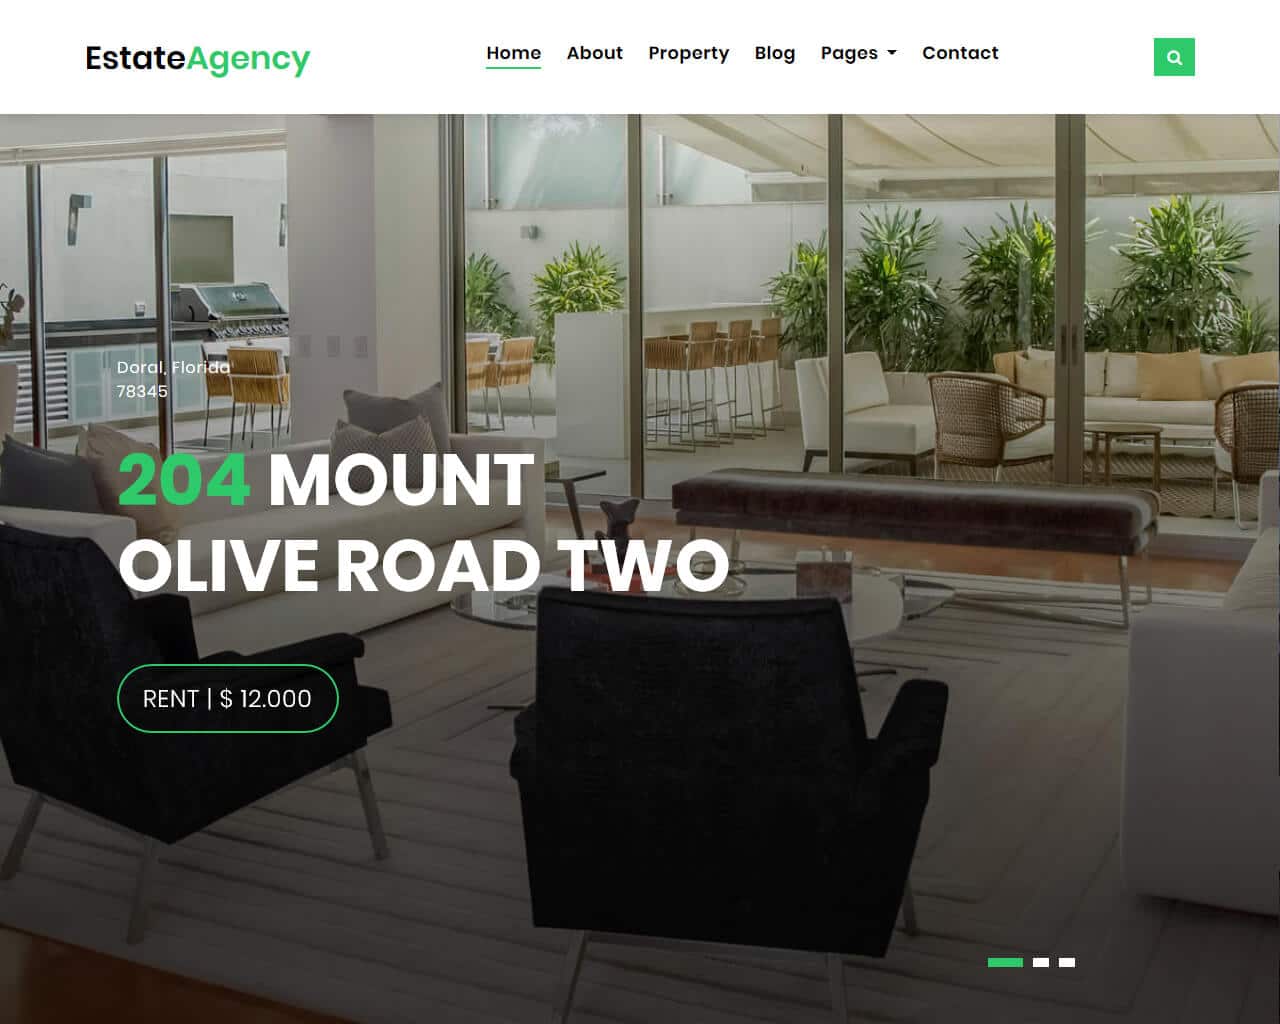 Best Real Estate Website Templates to Sell Properties 2019